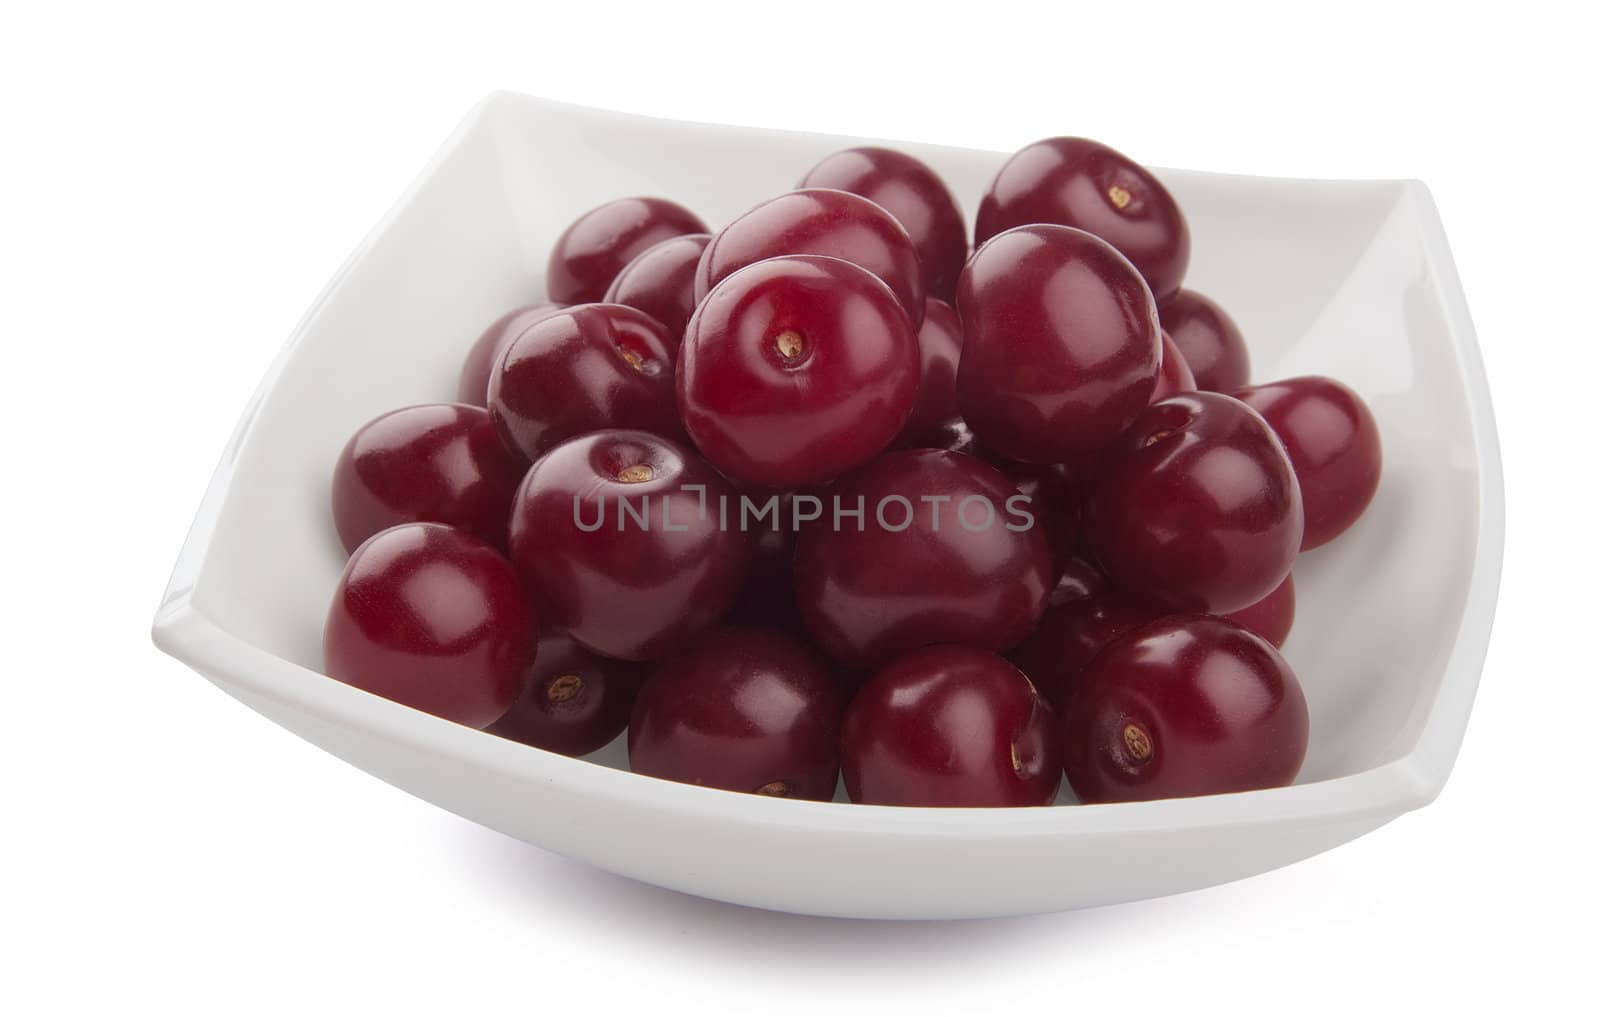 Some red cherries in the white plate